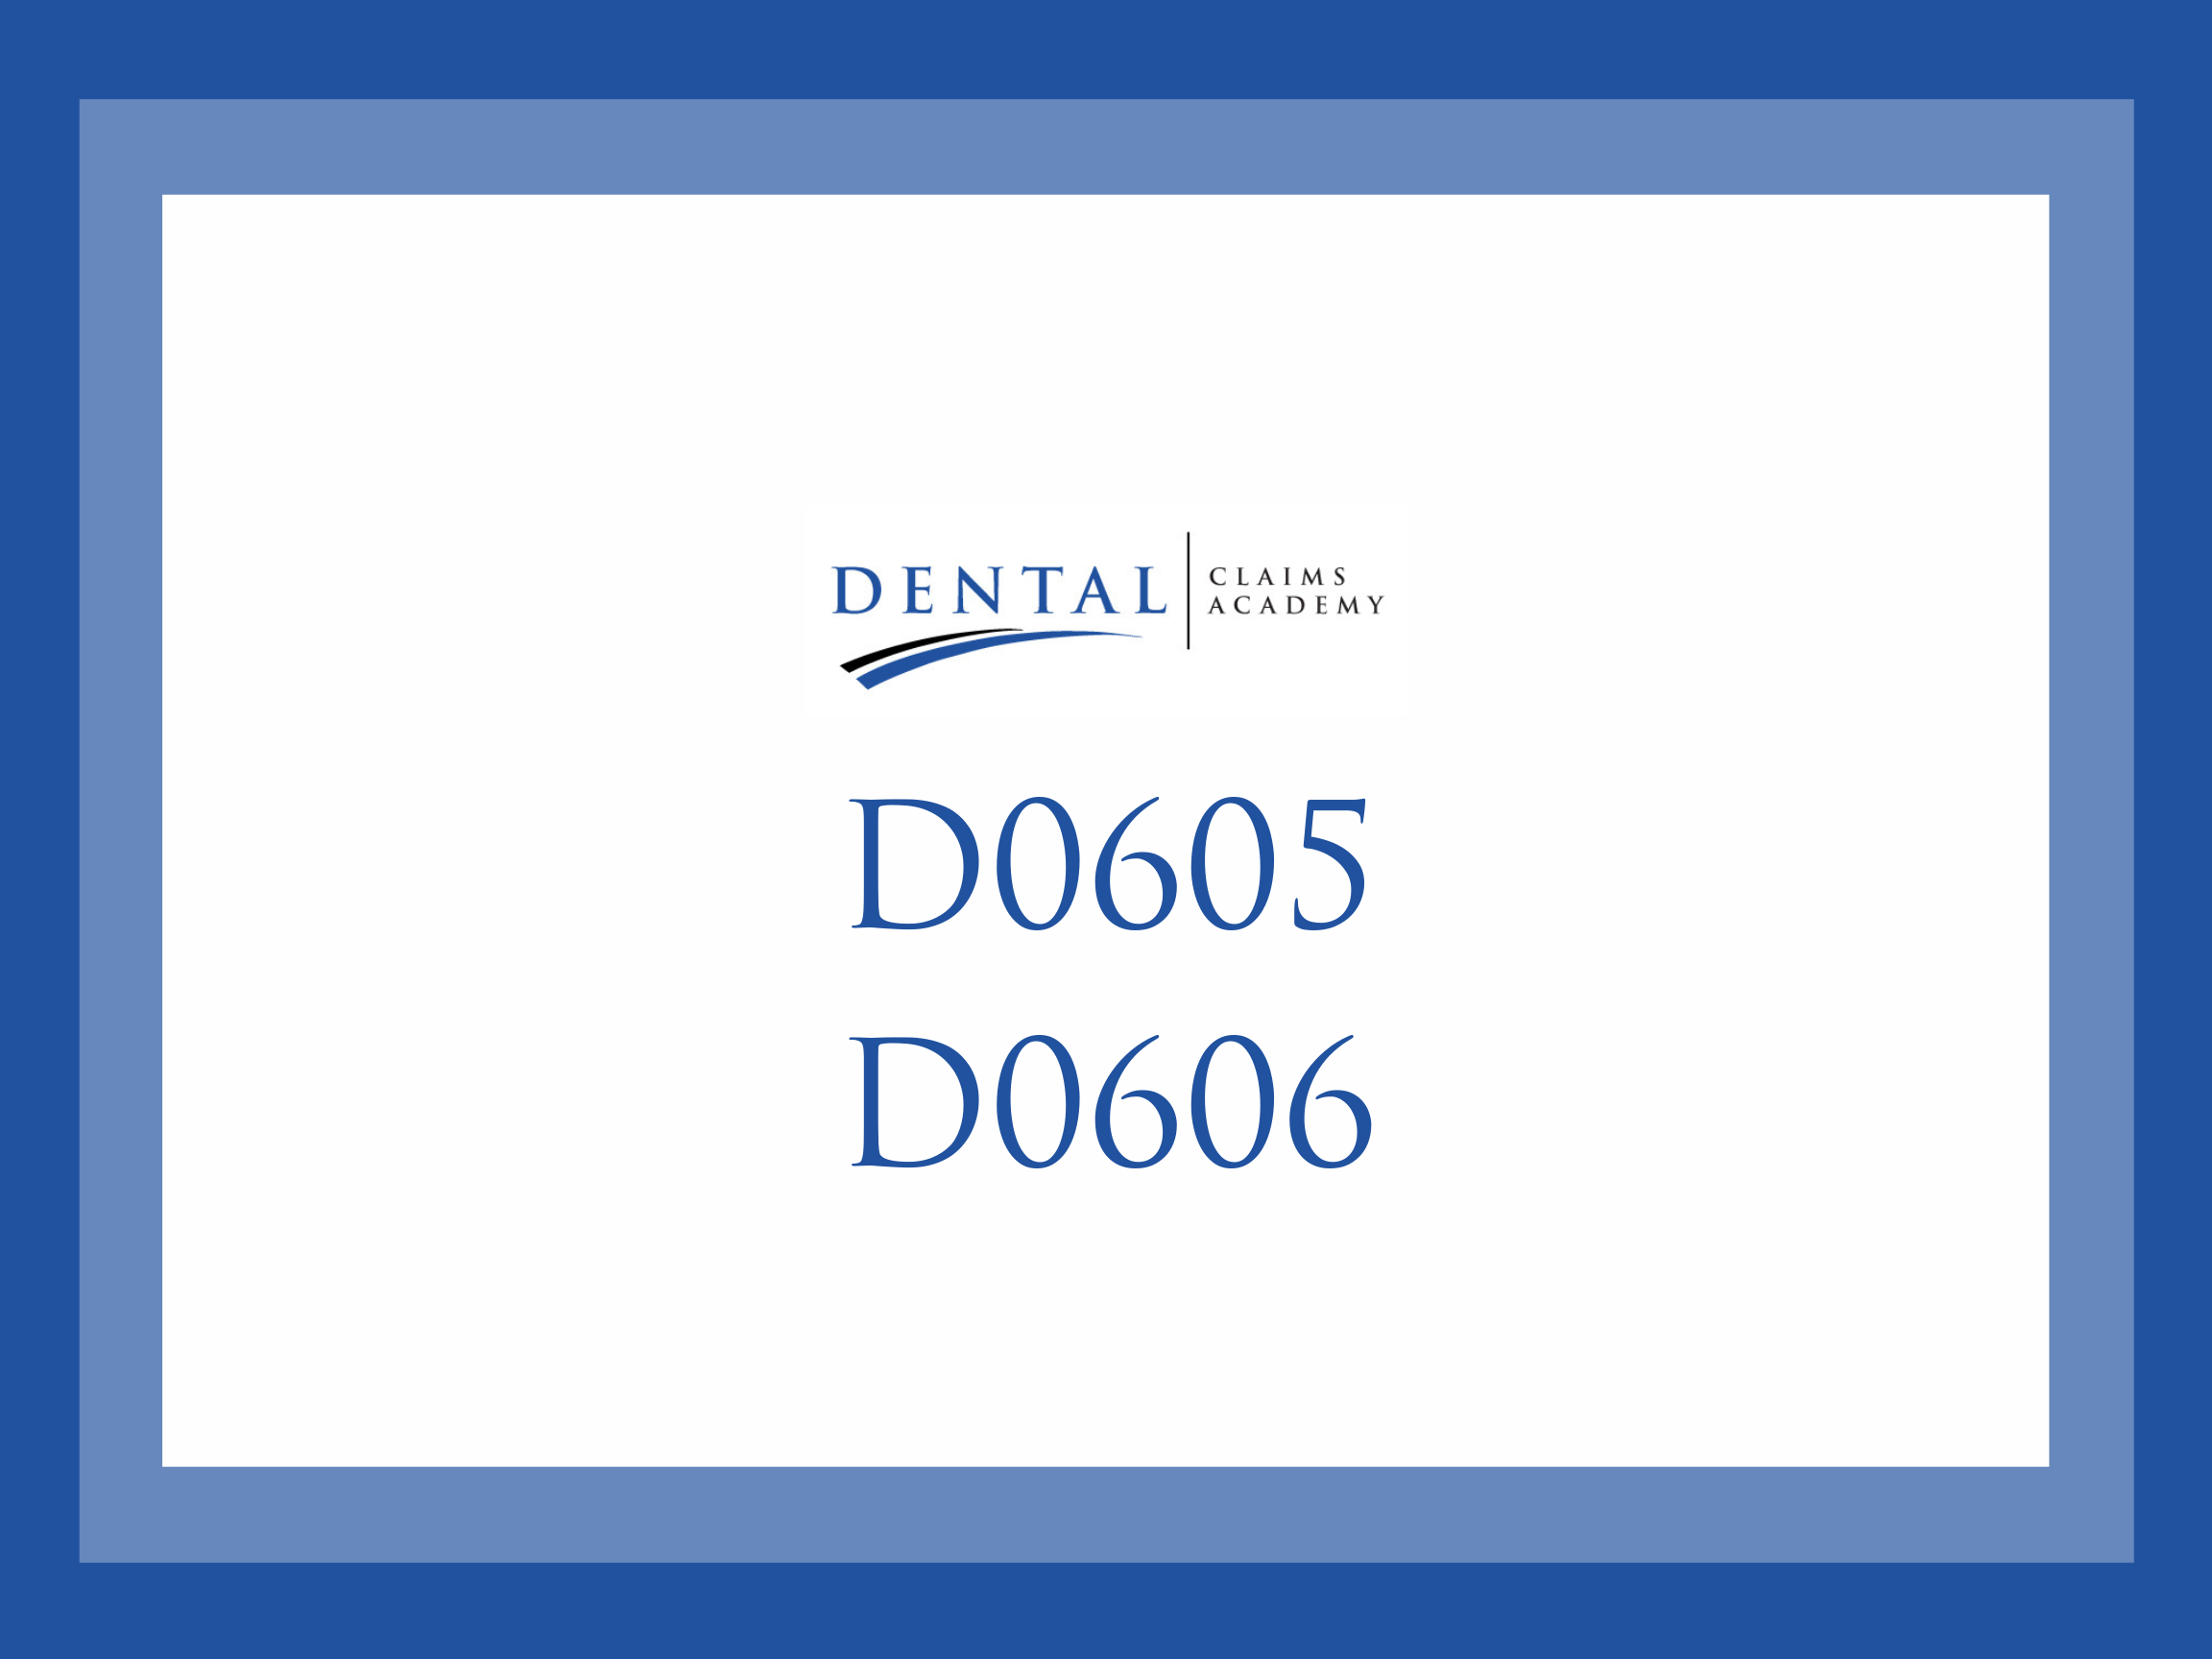 Is your dental practice performing COVID-19 tests?